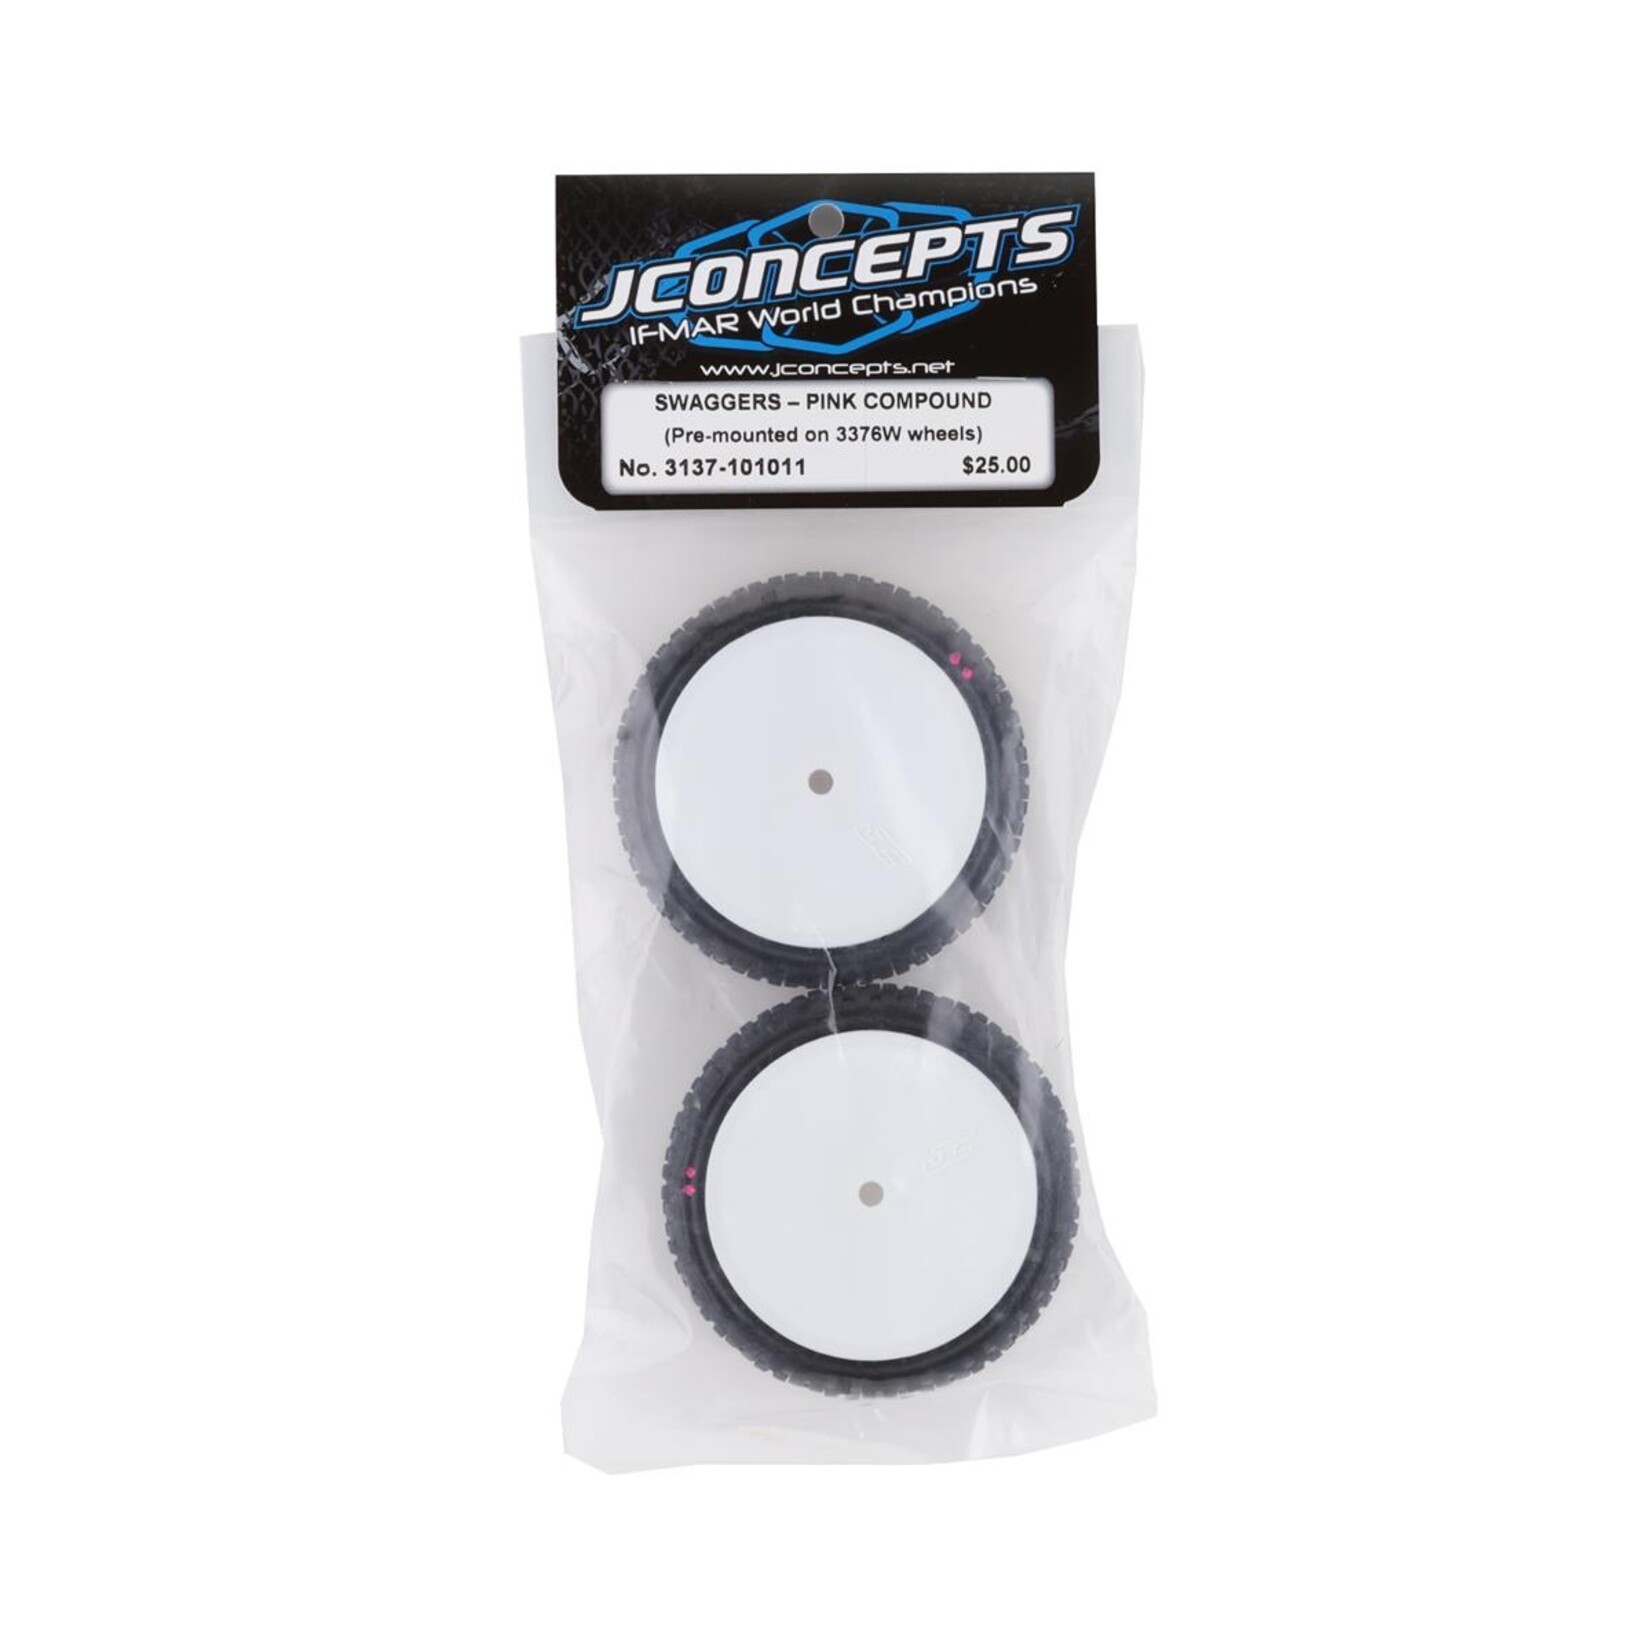 JConcepts JConcepts Swaggers 2.2" Pre-Mounted 2WD Front Buggy Carpet Tires (White) (2) (Pink) w/12mm Hex #3137-101011